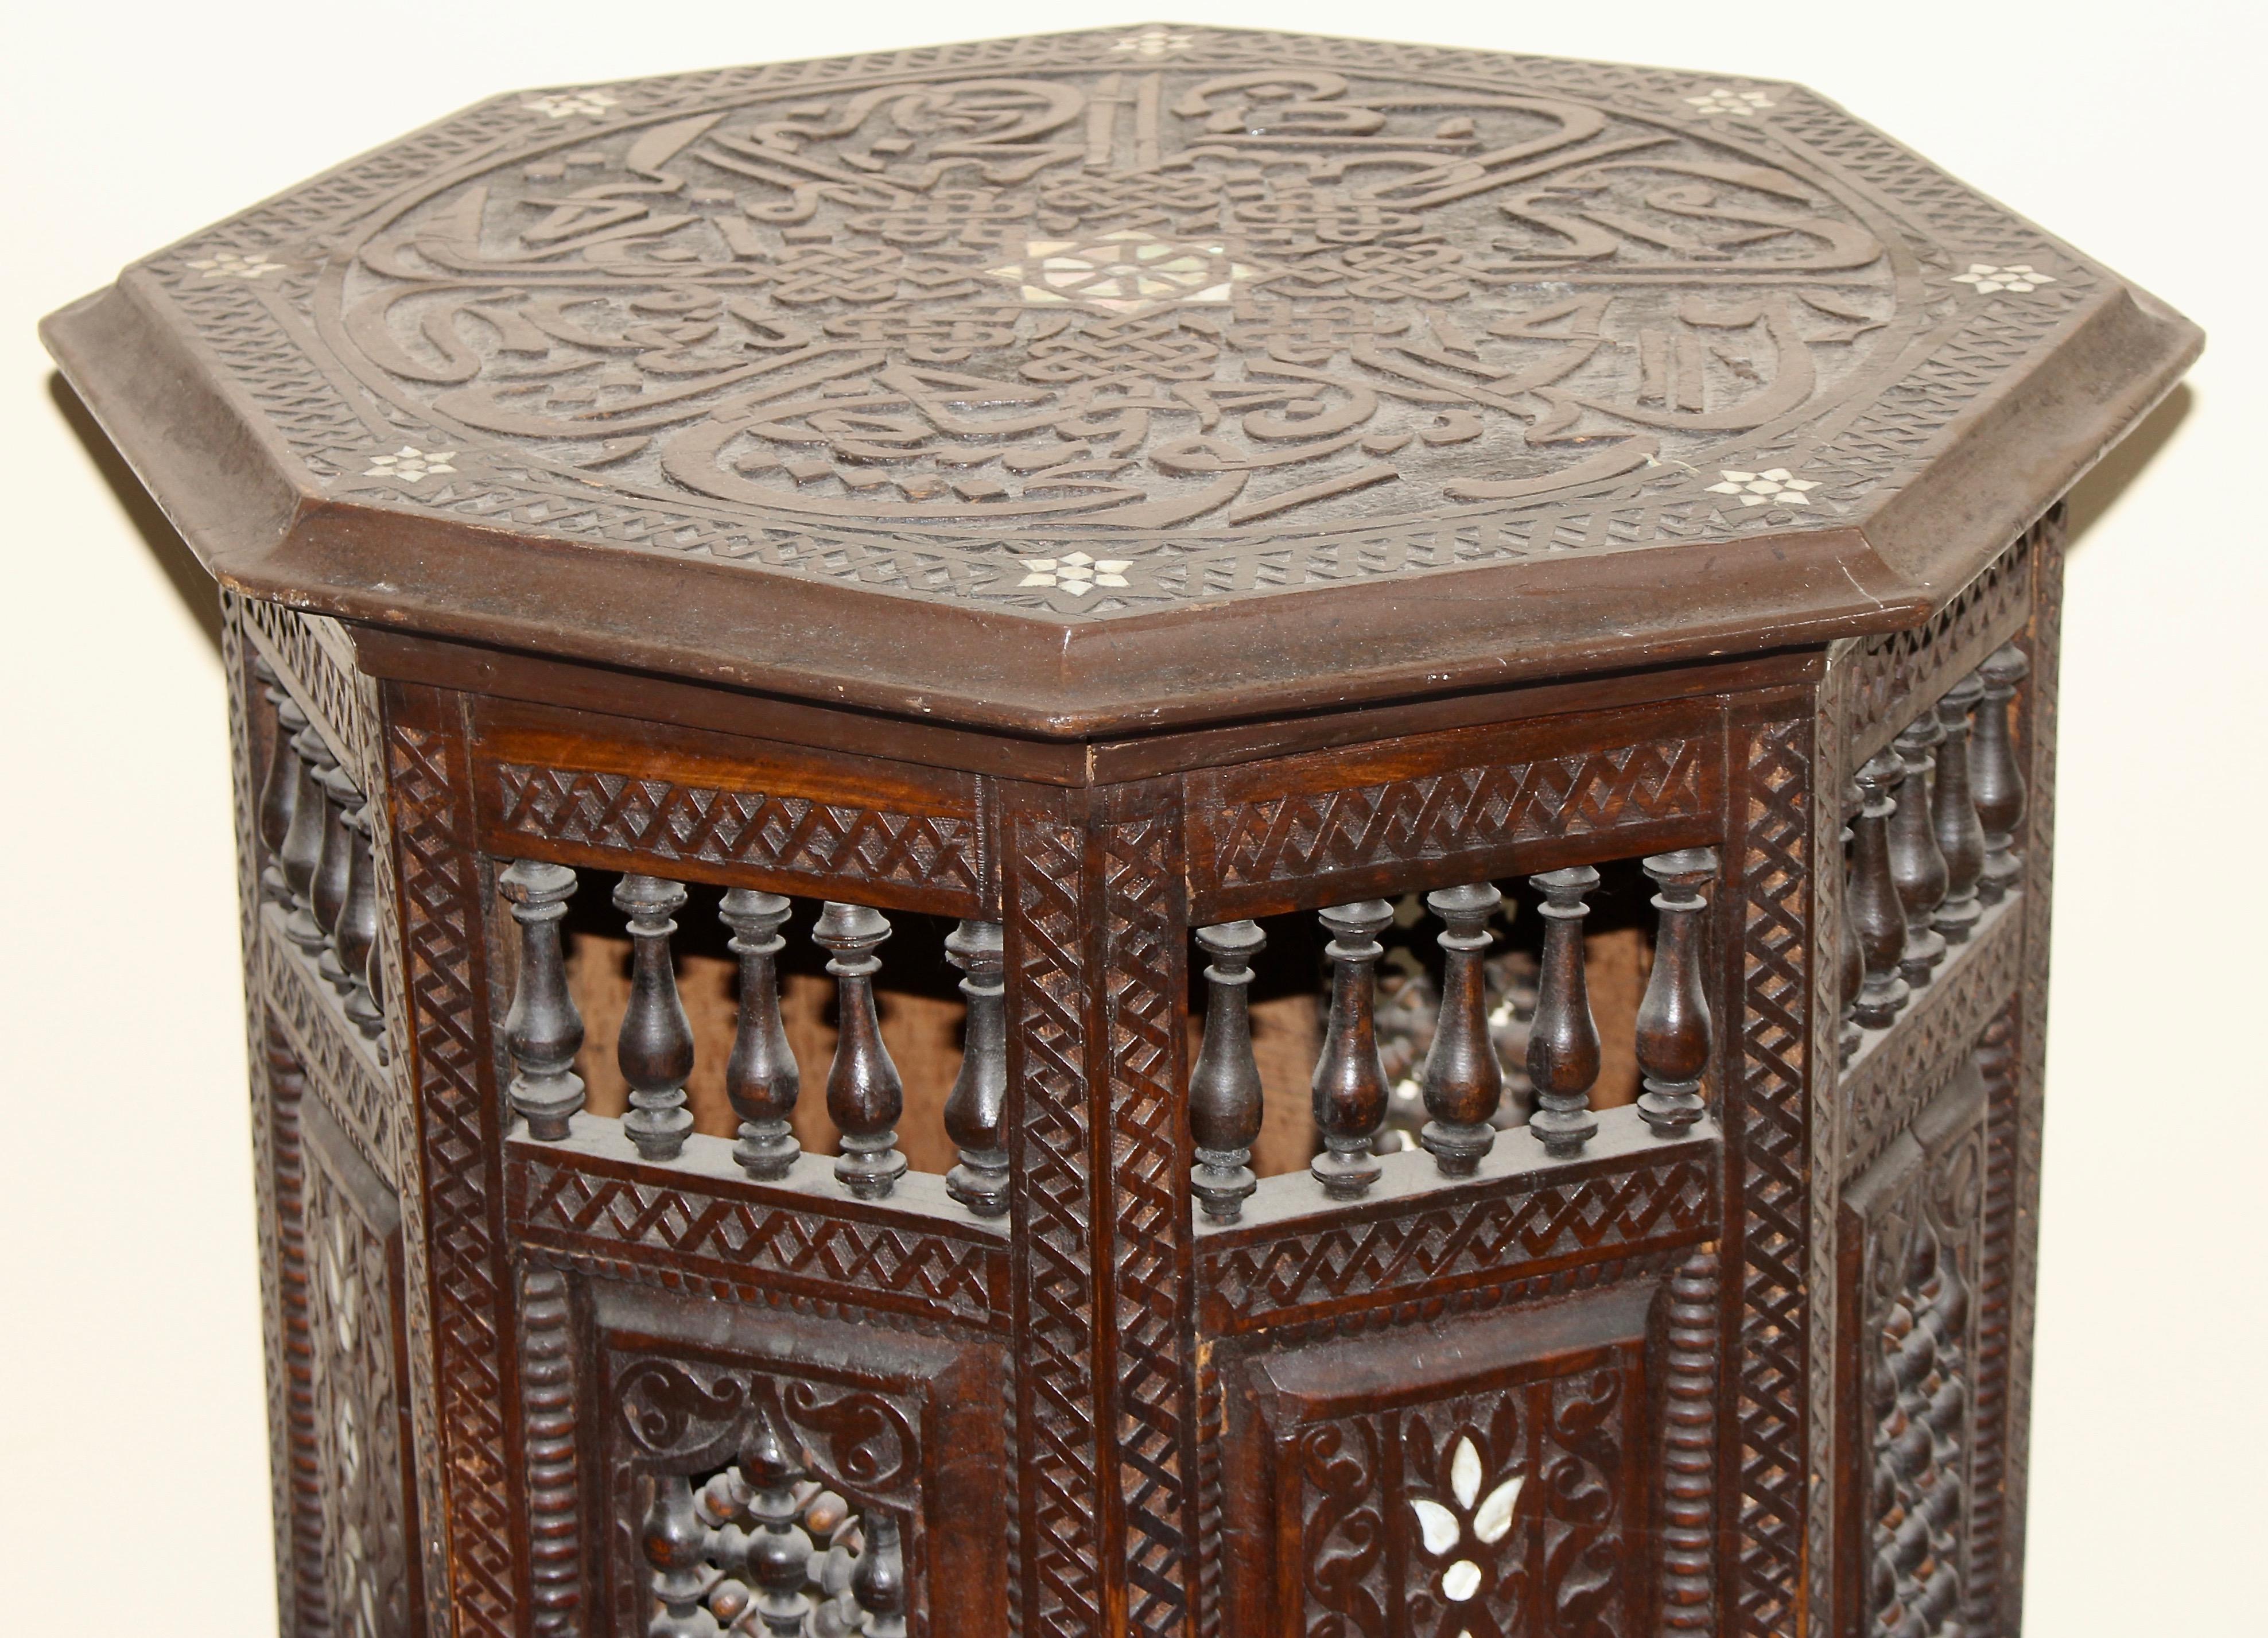 Antique, Oriental side (tea or game) table, mother-of-pearl inlays, 19th century.

With Arabic calligraphy.
Very decorative.

Partially in need of restoration.